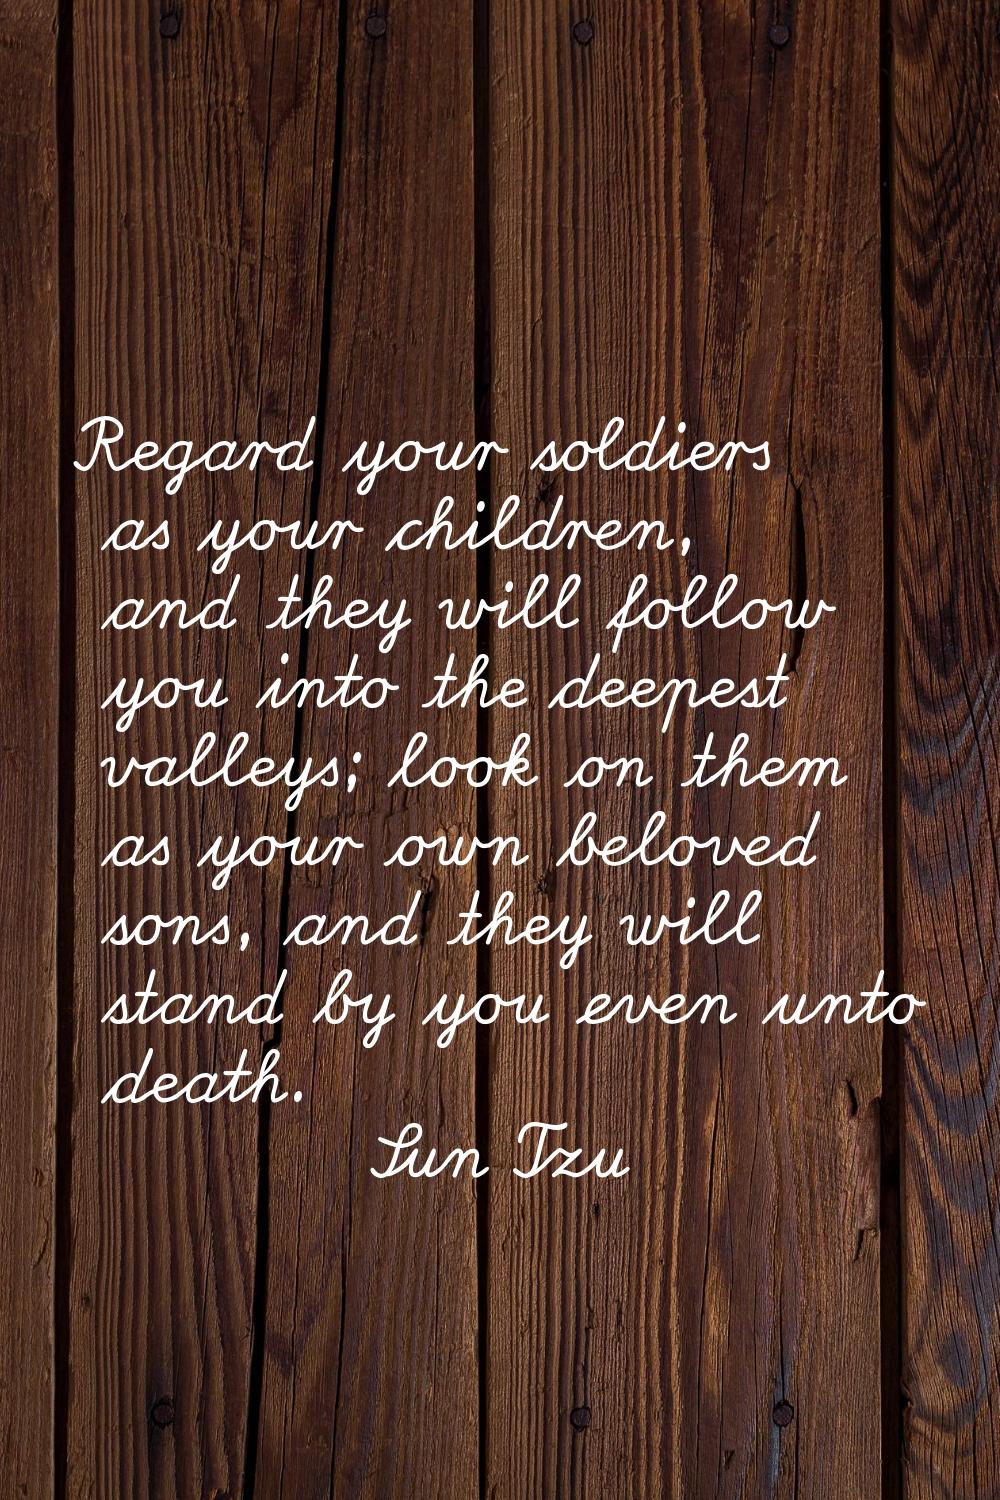 Regard your soldiers as your children, and they will follow you into the deepest valleys; look on t